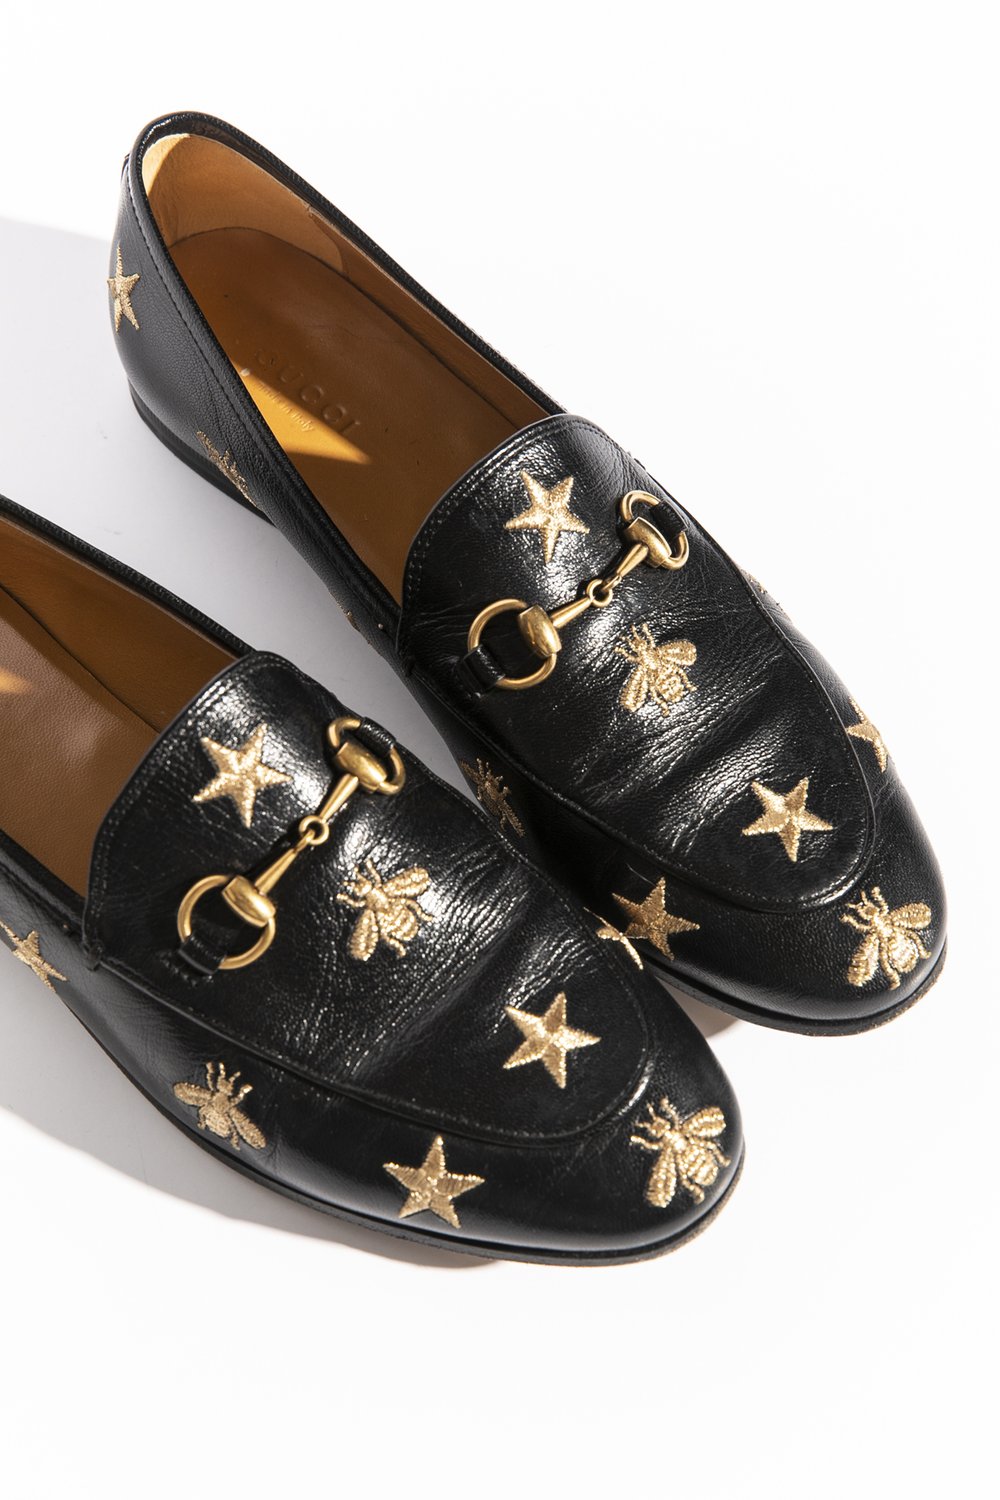 Gucci Black Leather Jordaan Embroidered Bee Horsebit Slip On Loafers Size  37